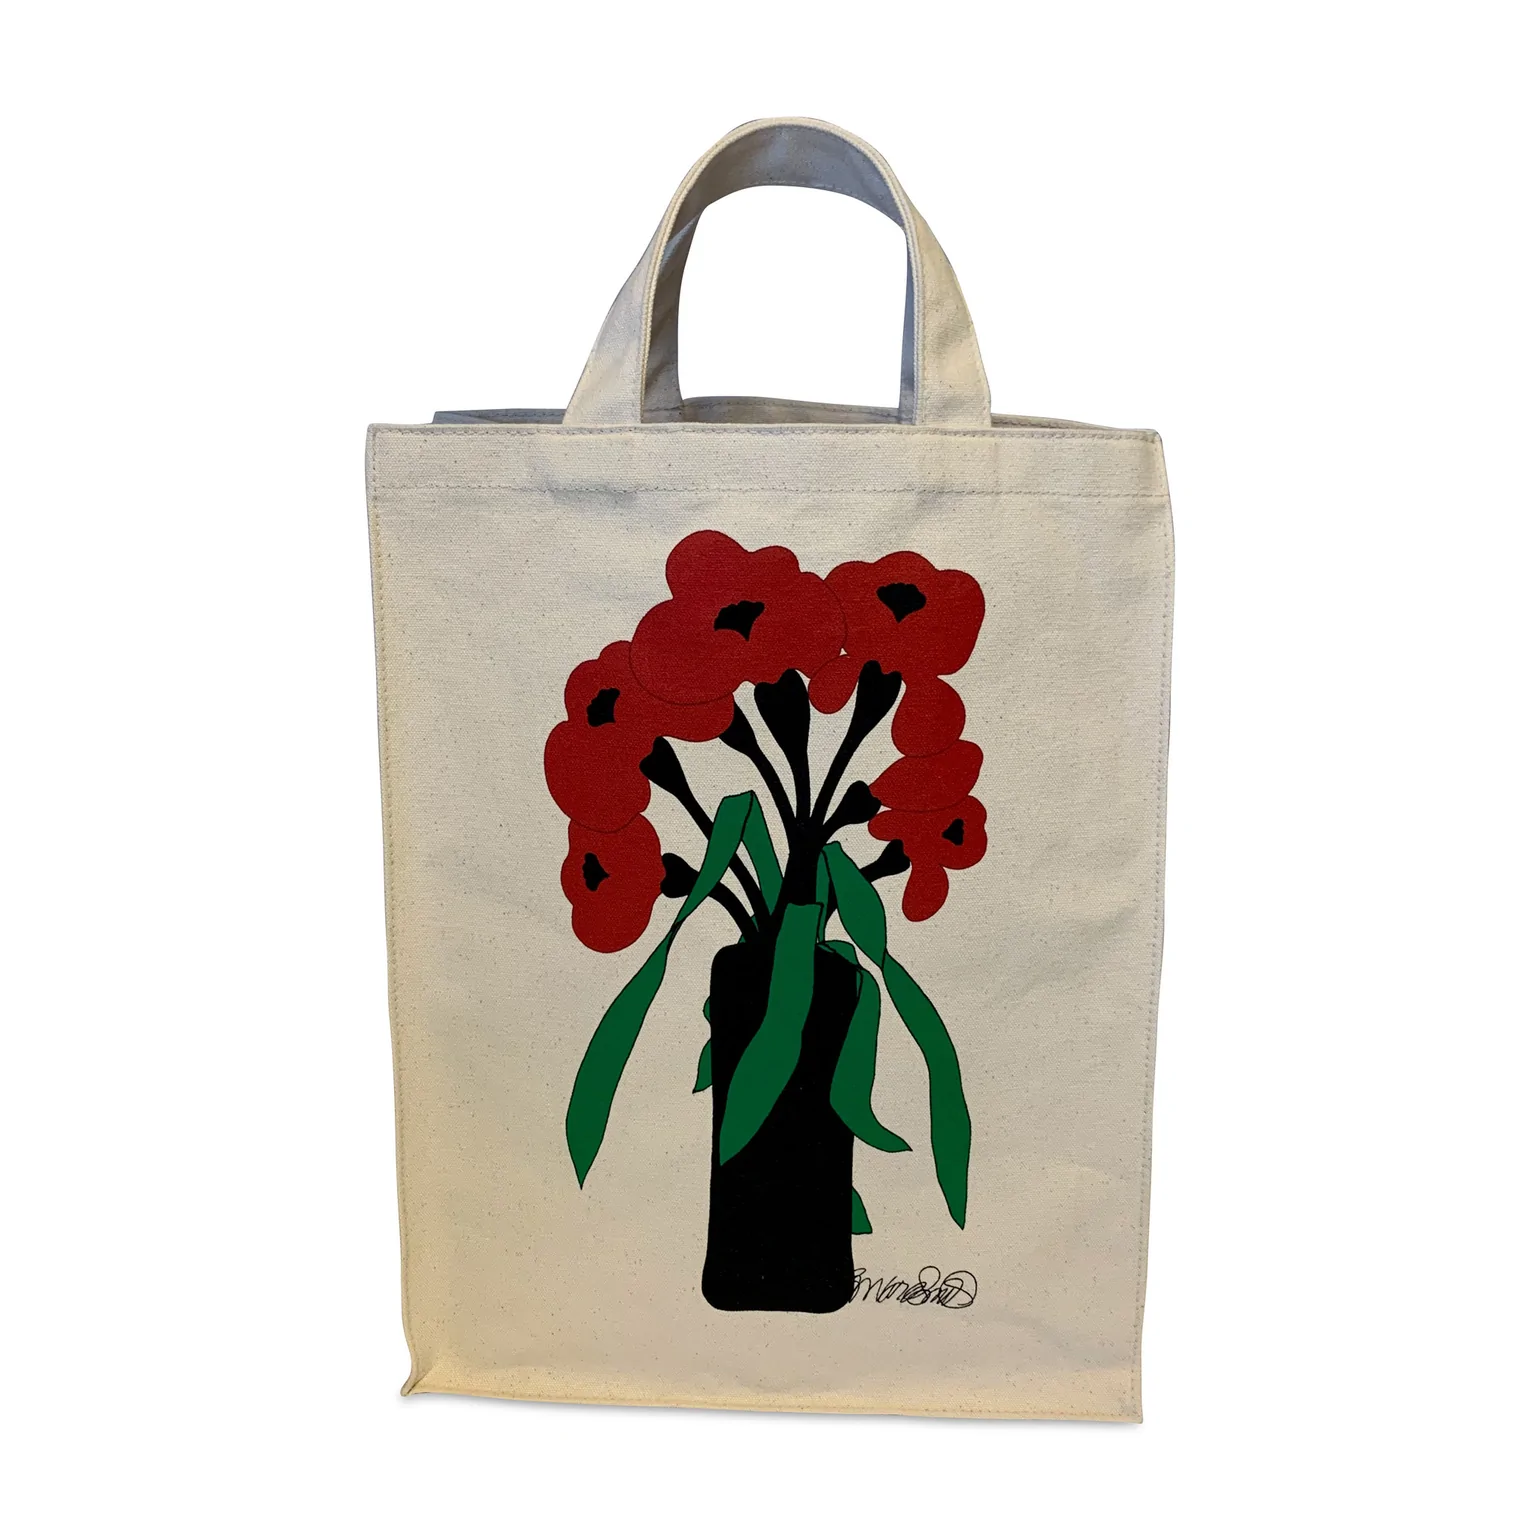 White tote bag with red flowers